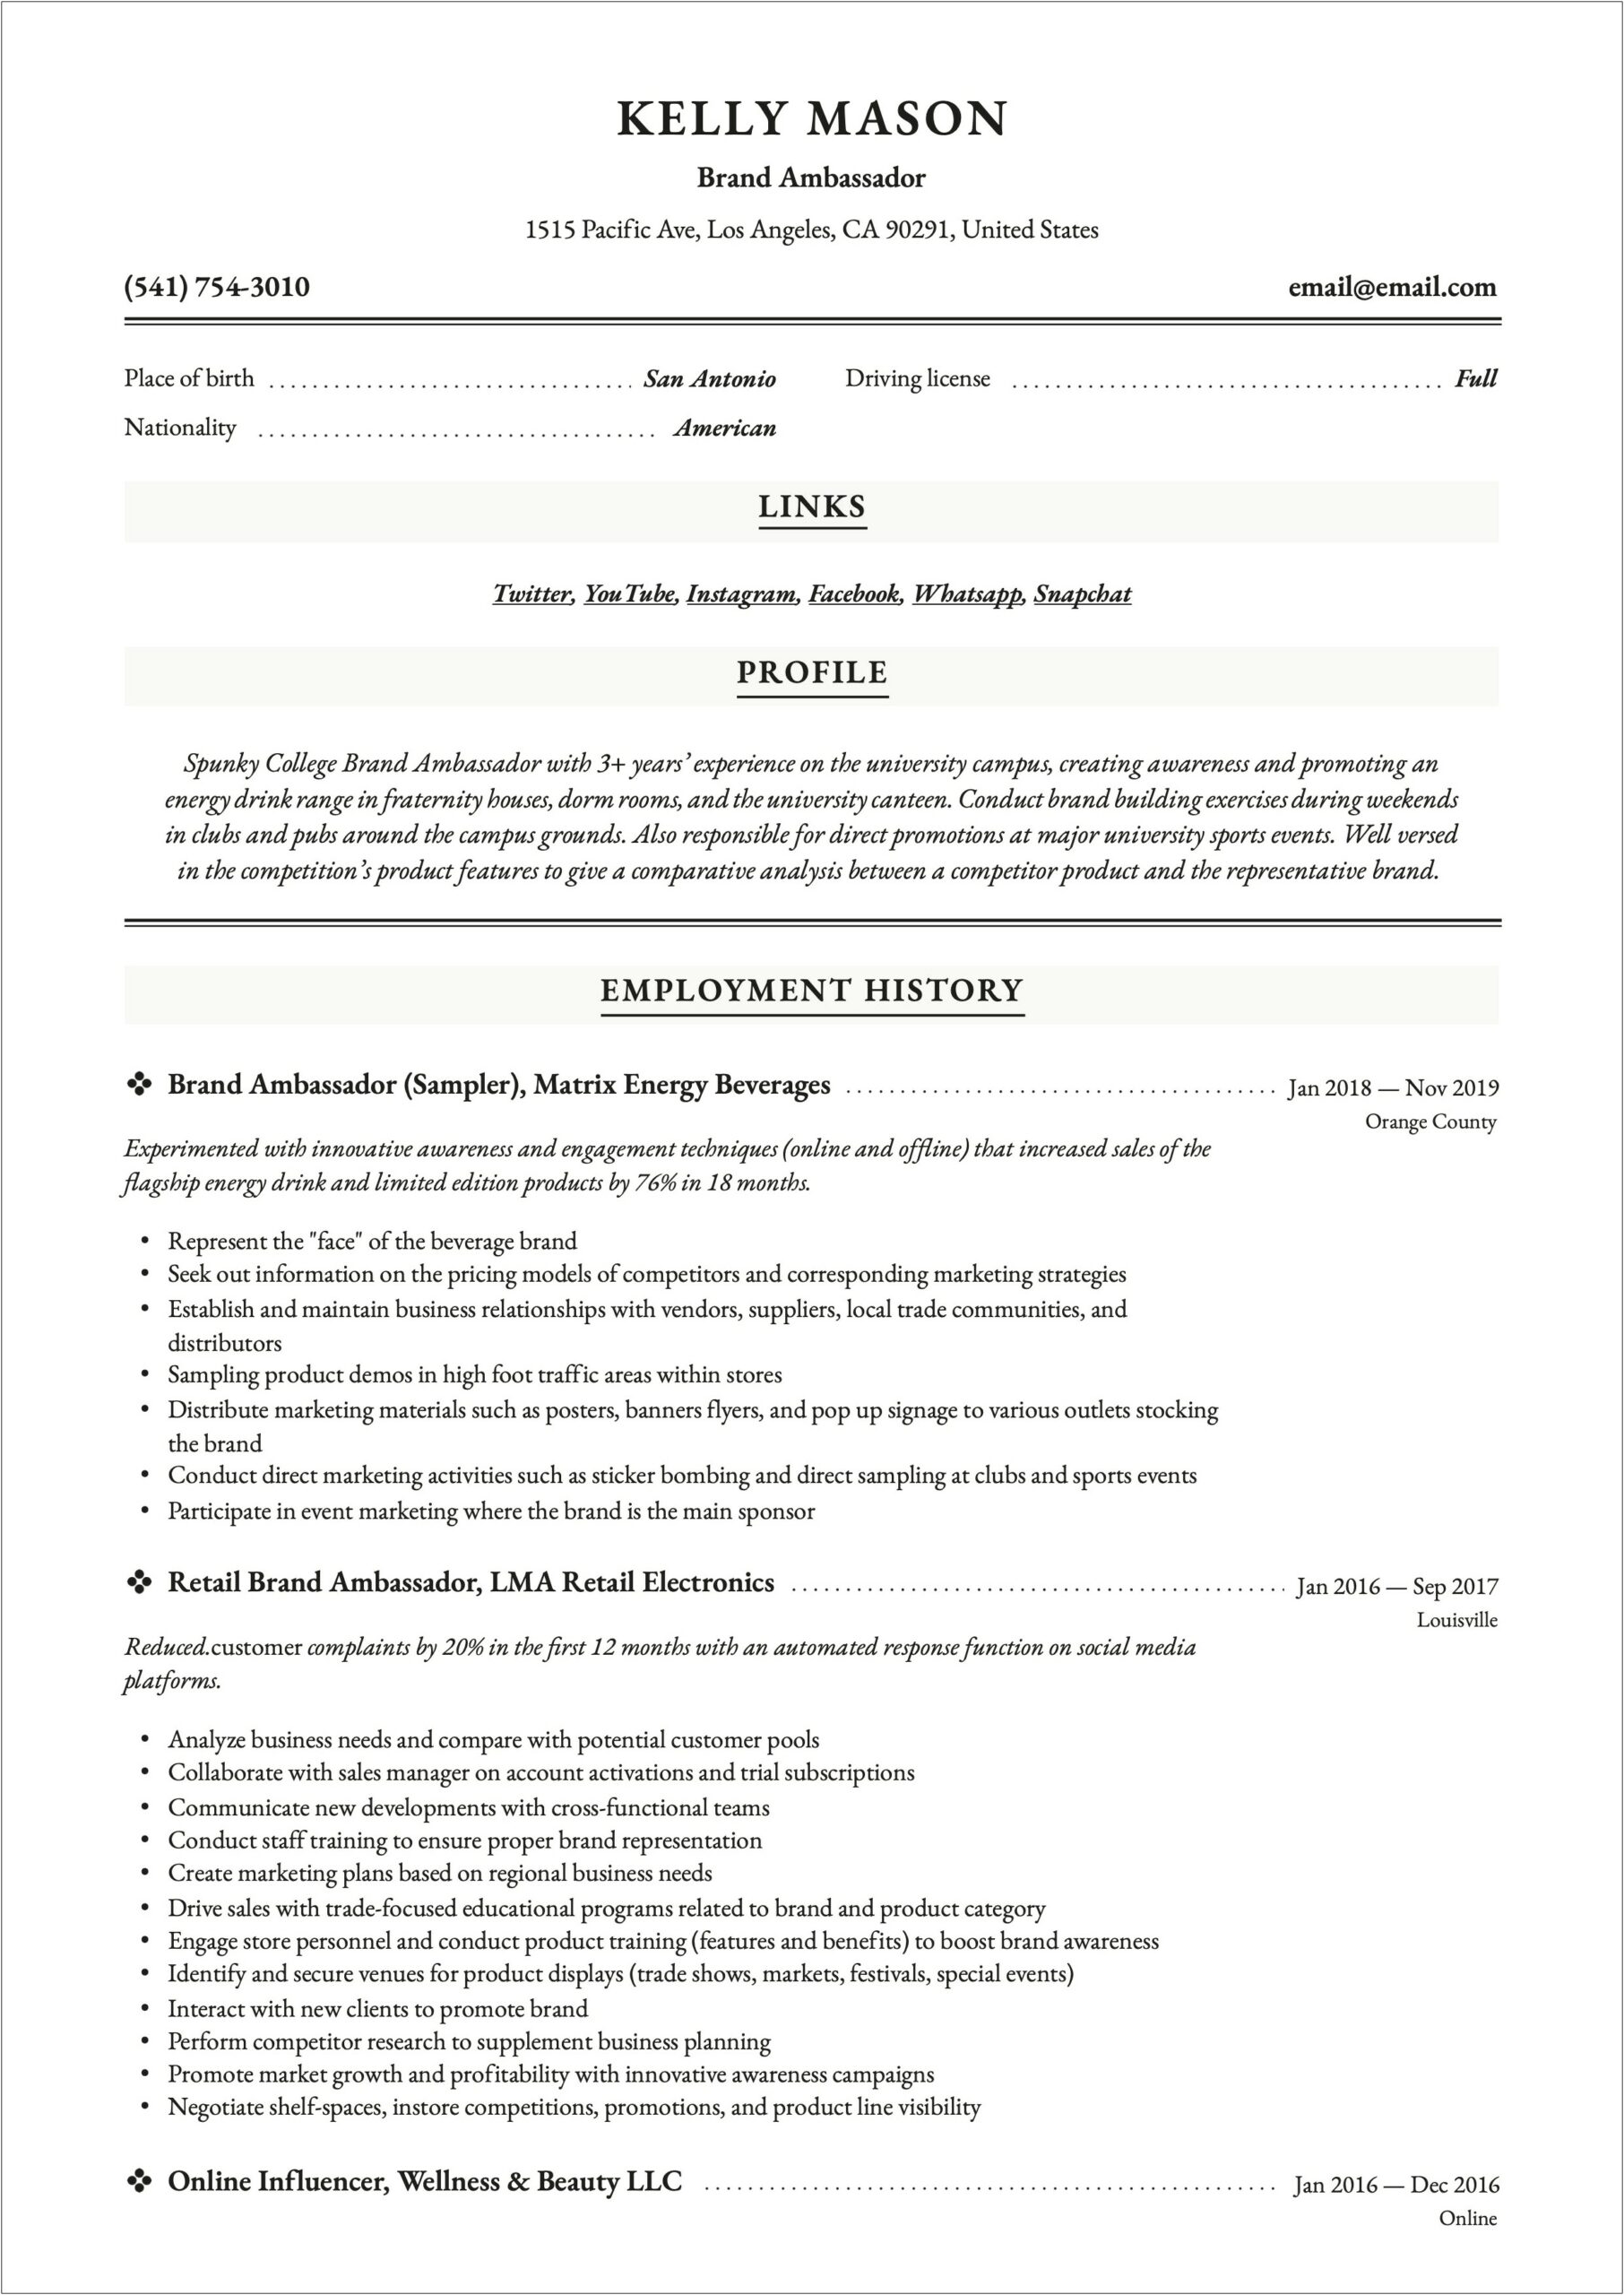 Resume Skills And Abilities For An Ambassador